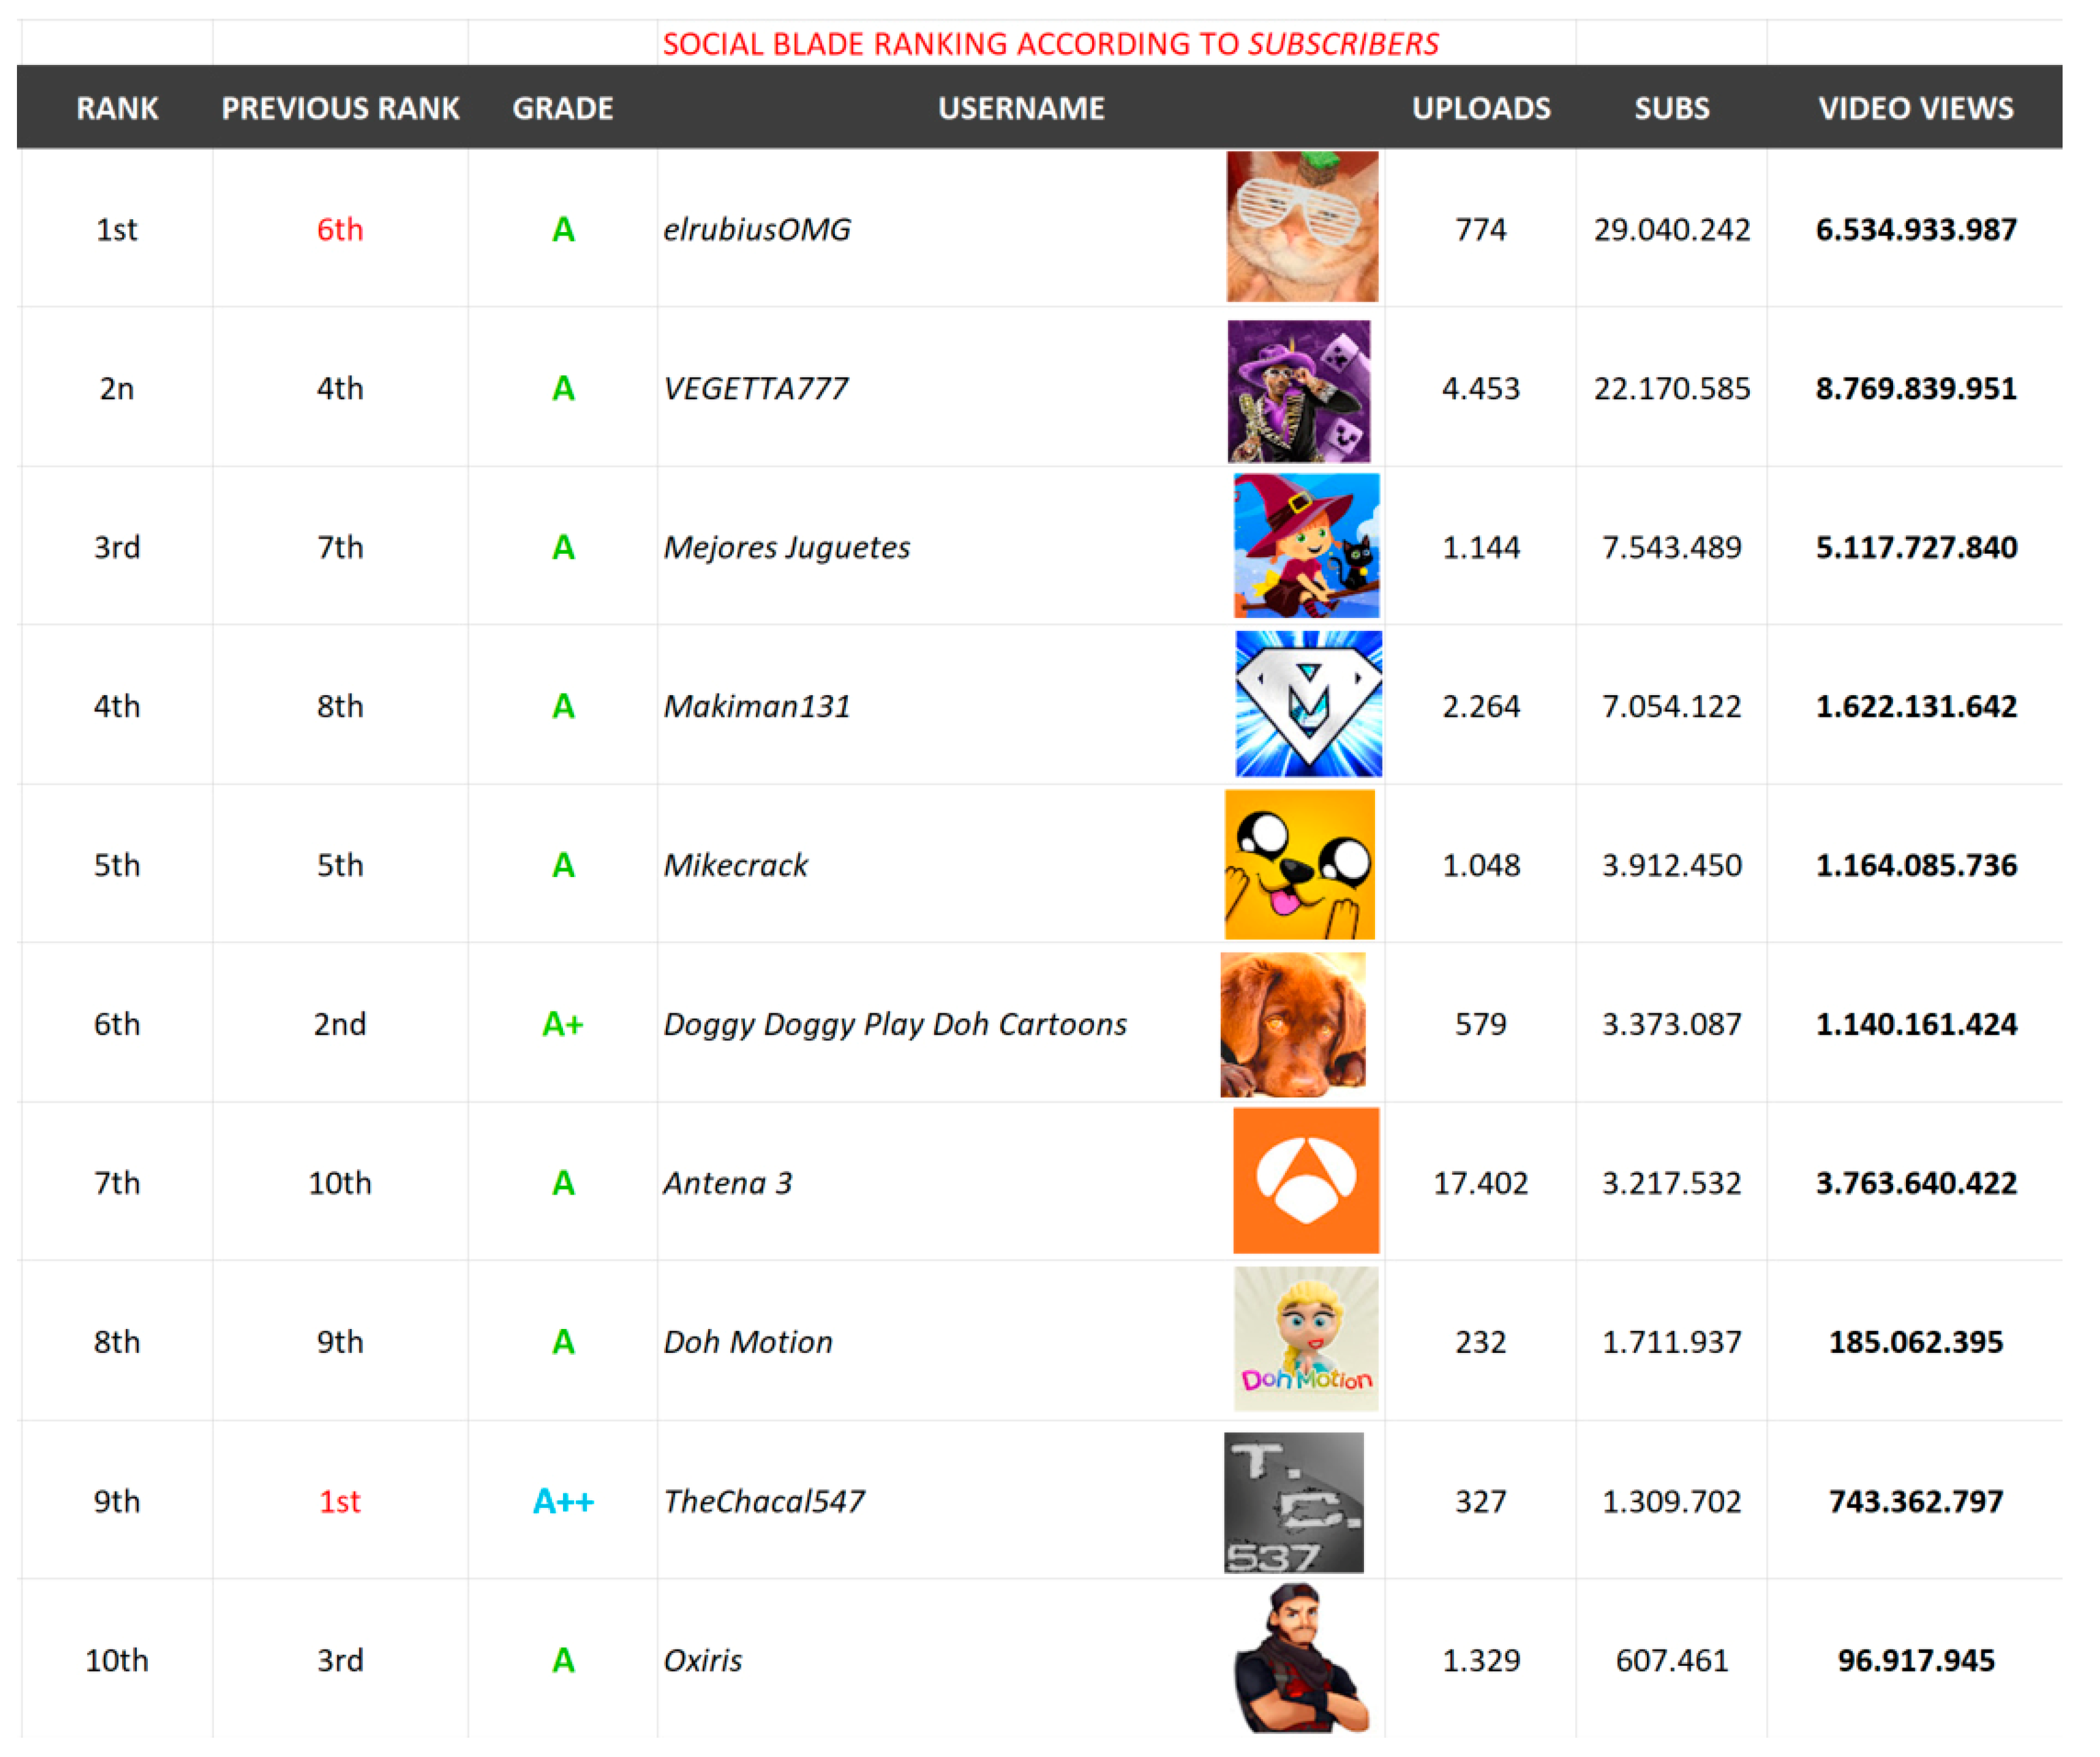 Top 20 Gaming  Channels - Social Blade